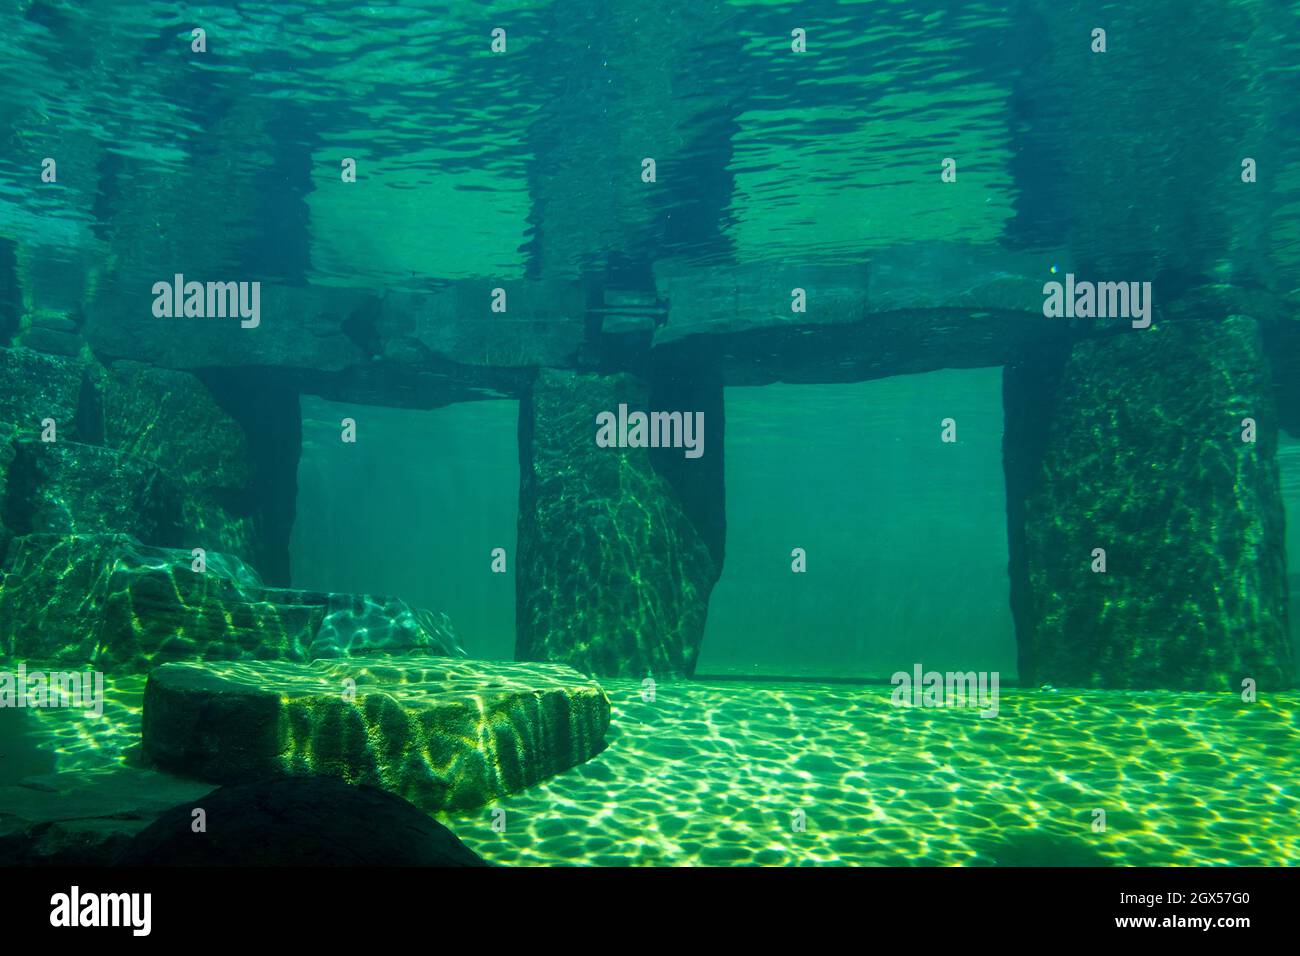 A stone columns under green water Stock Photo